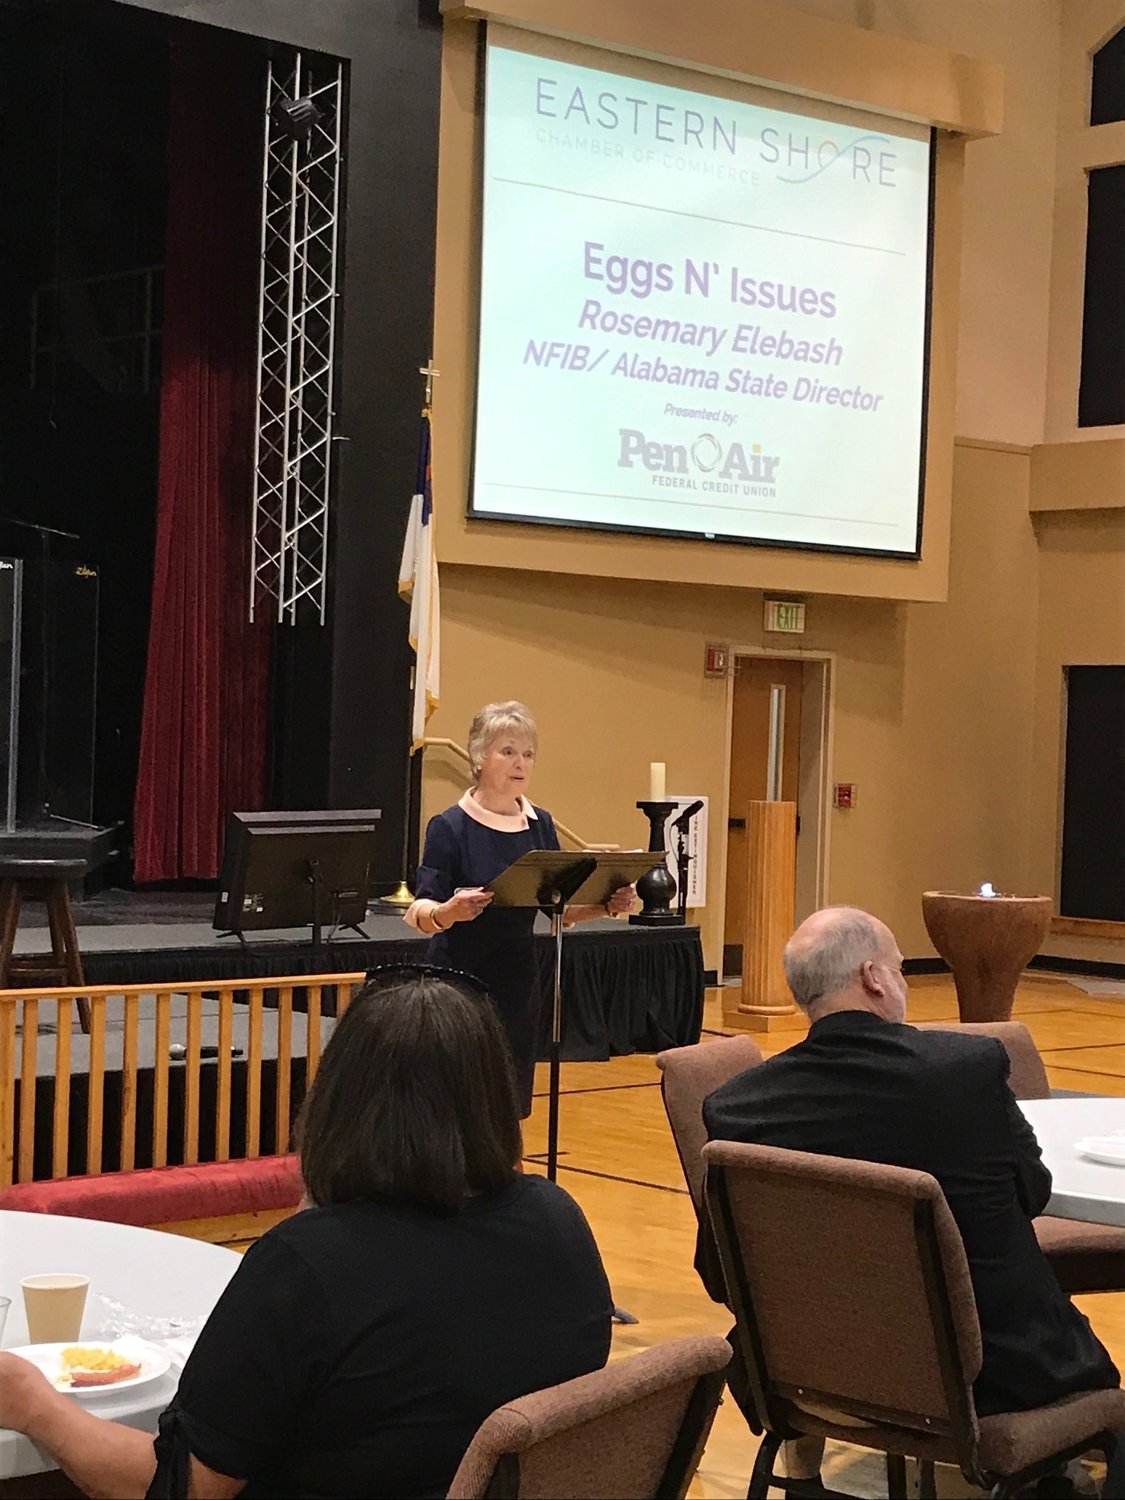 Rosemary Elebash, Alabama director of the National Federation of Independent Businesses, addresses the March Eggs and Issues meeting of the Eastern Shore Chamber of Commerce.